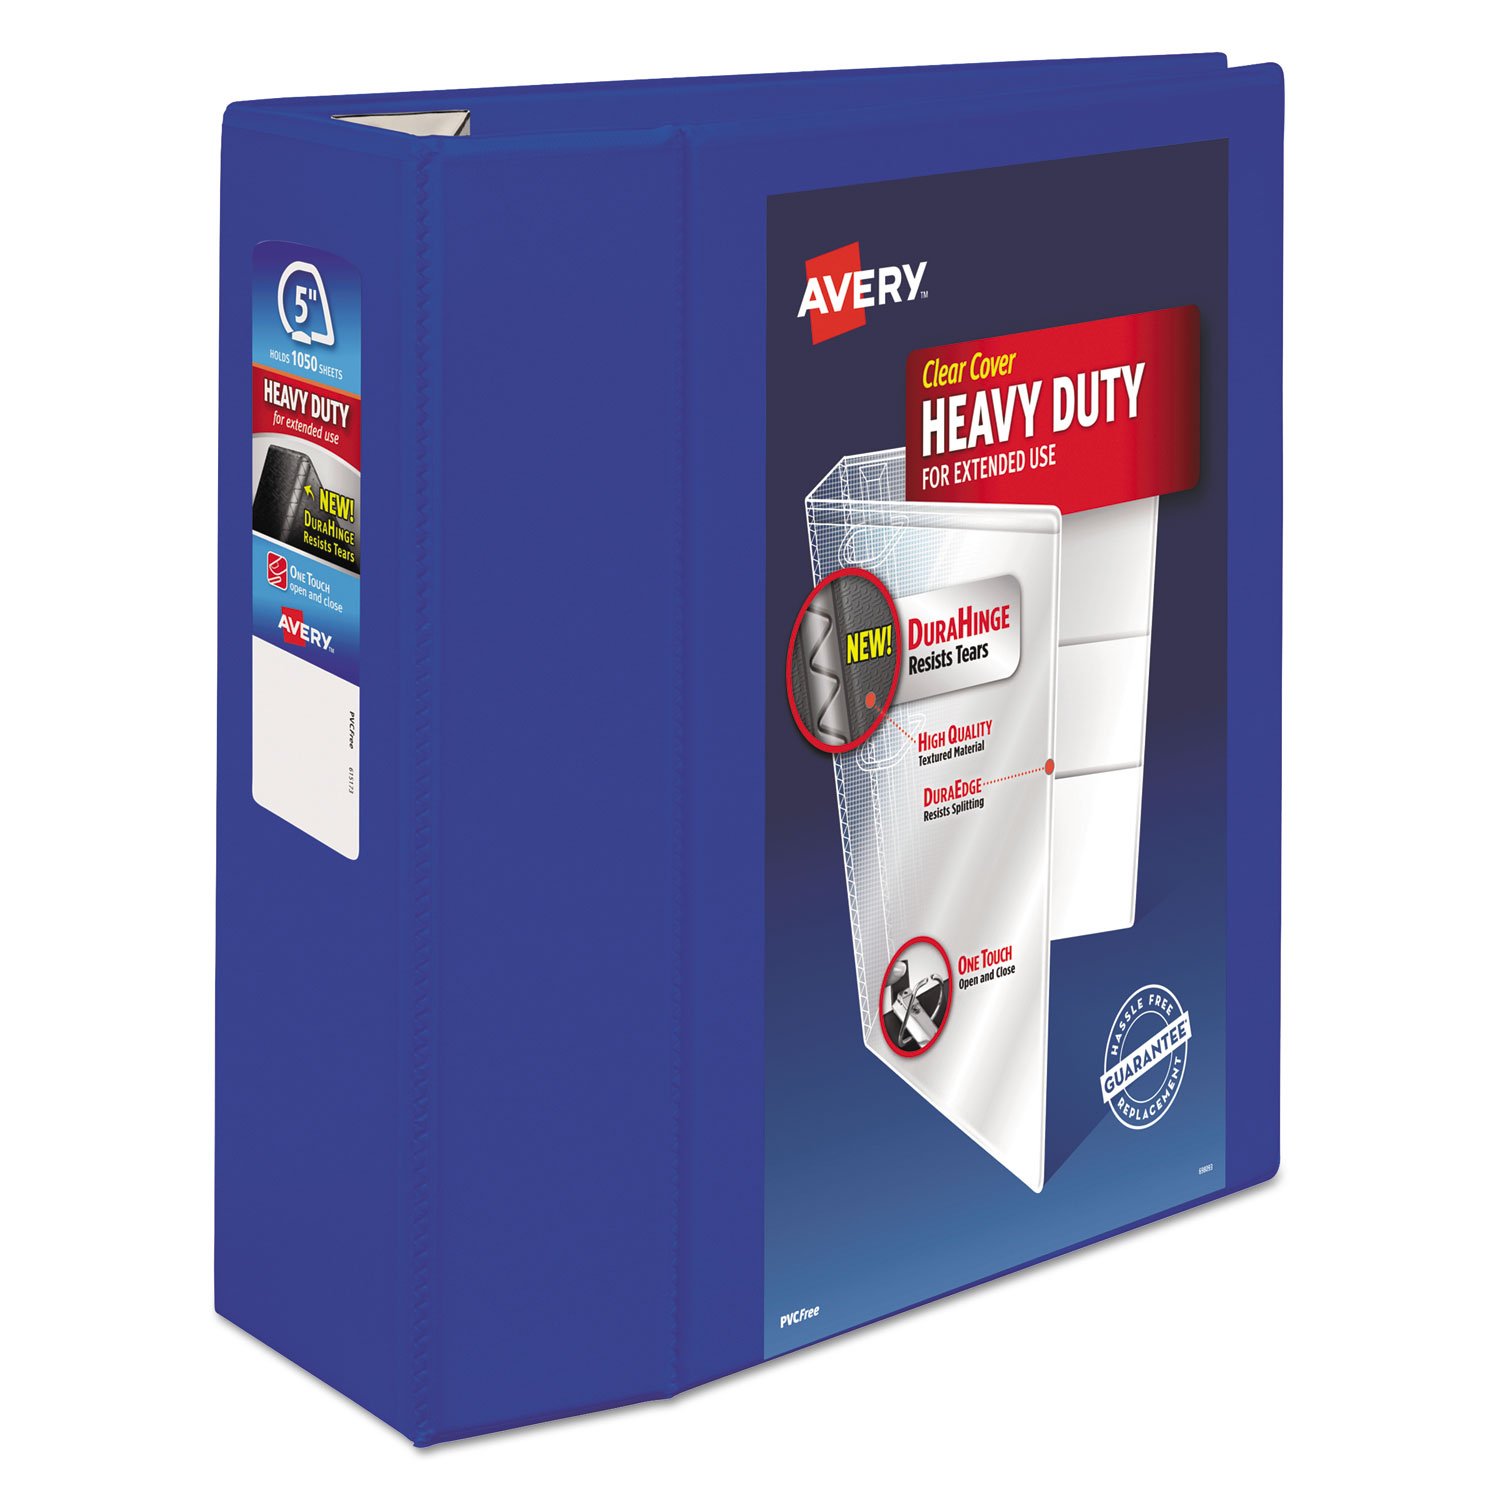  Avery 79817 Heavy-Duty View Binder with DuraHinge and Locking One Touch EZD Rings, 3 Rings, 5 Capacity, 11 x 8.5, Pacific Blue (AVE79817) 